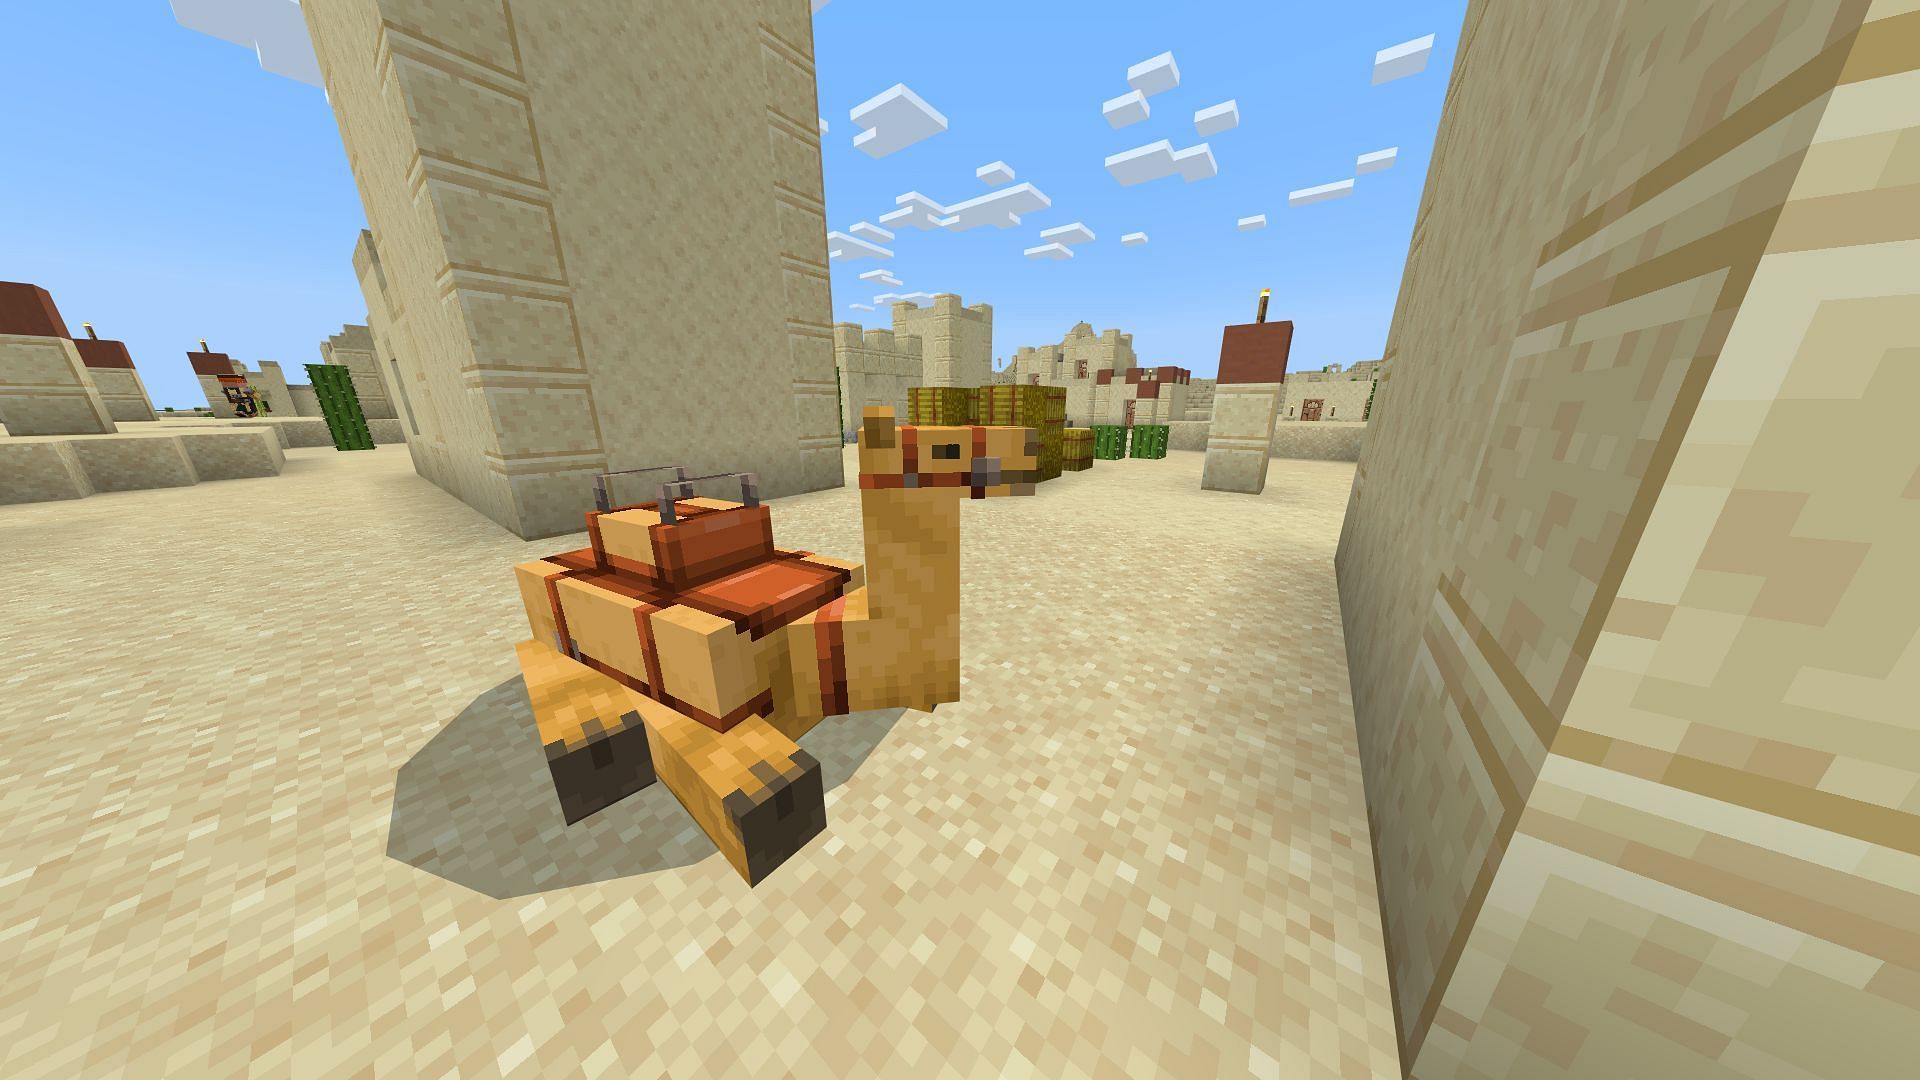 Saddle up on a camel and ride out to archeological sites in this Minecraft Bedrock seed (Image via Mojang)